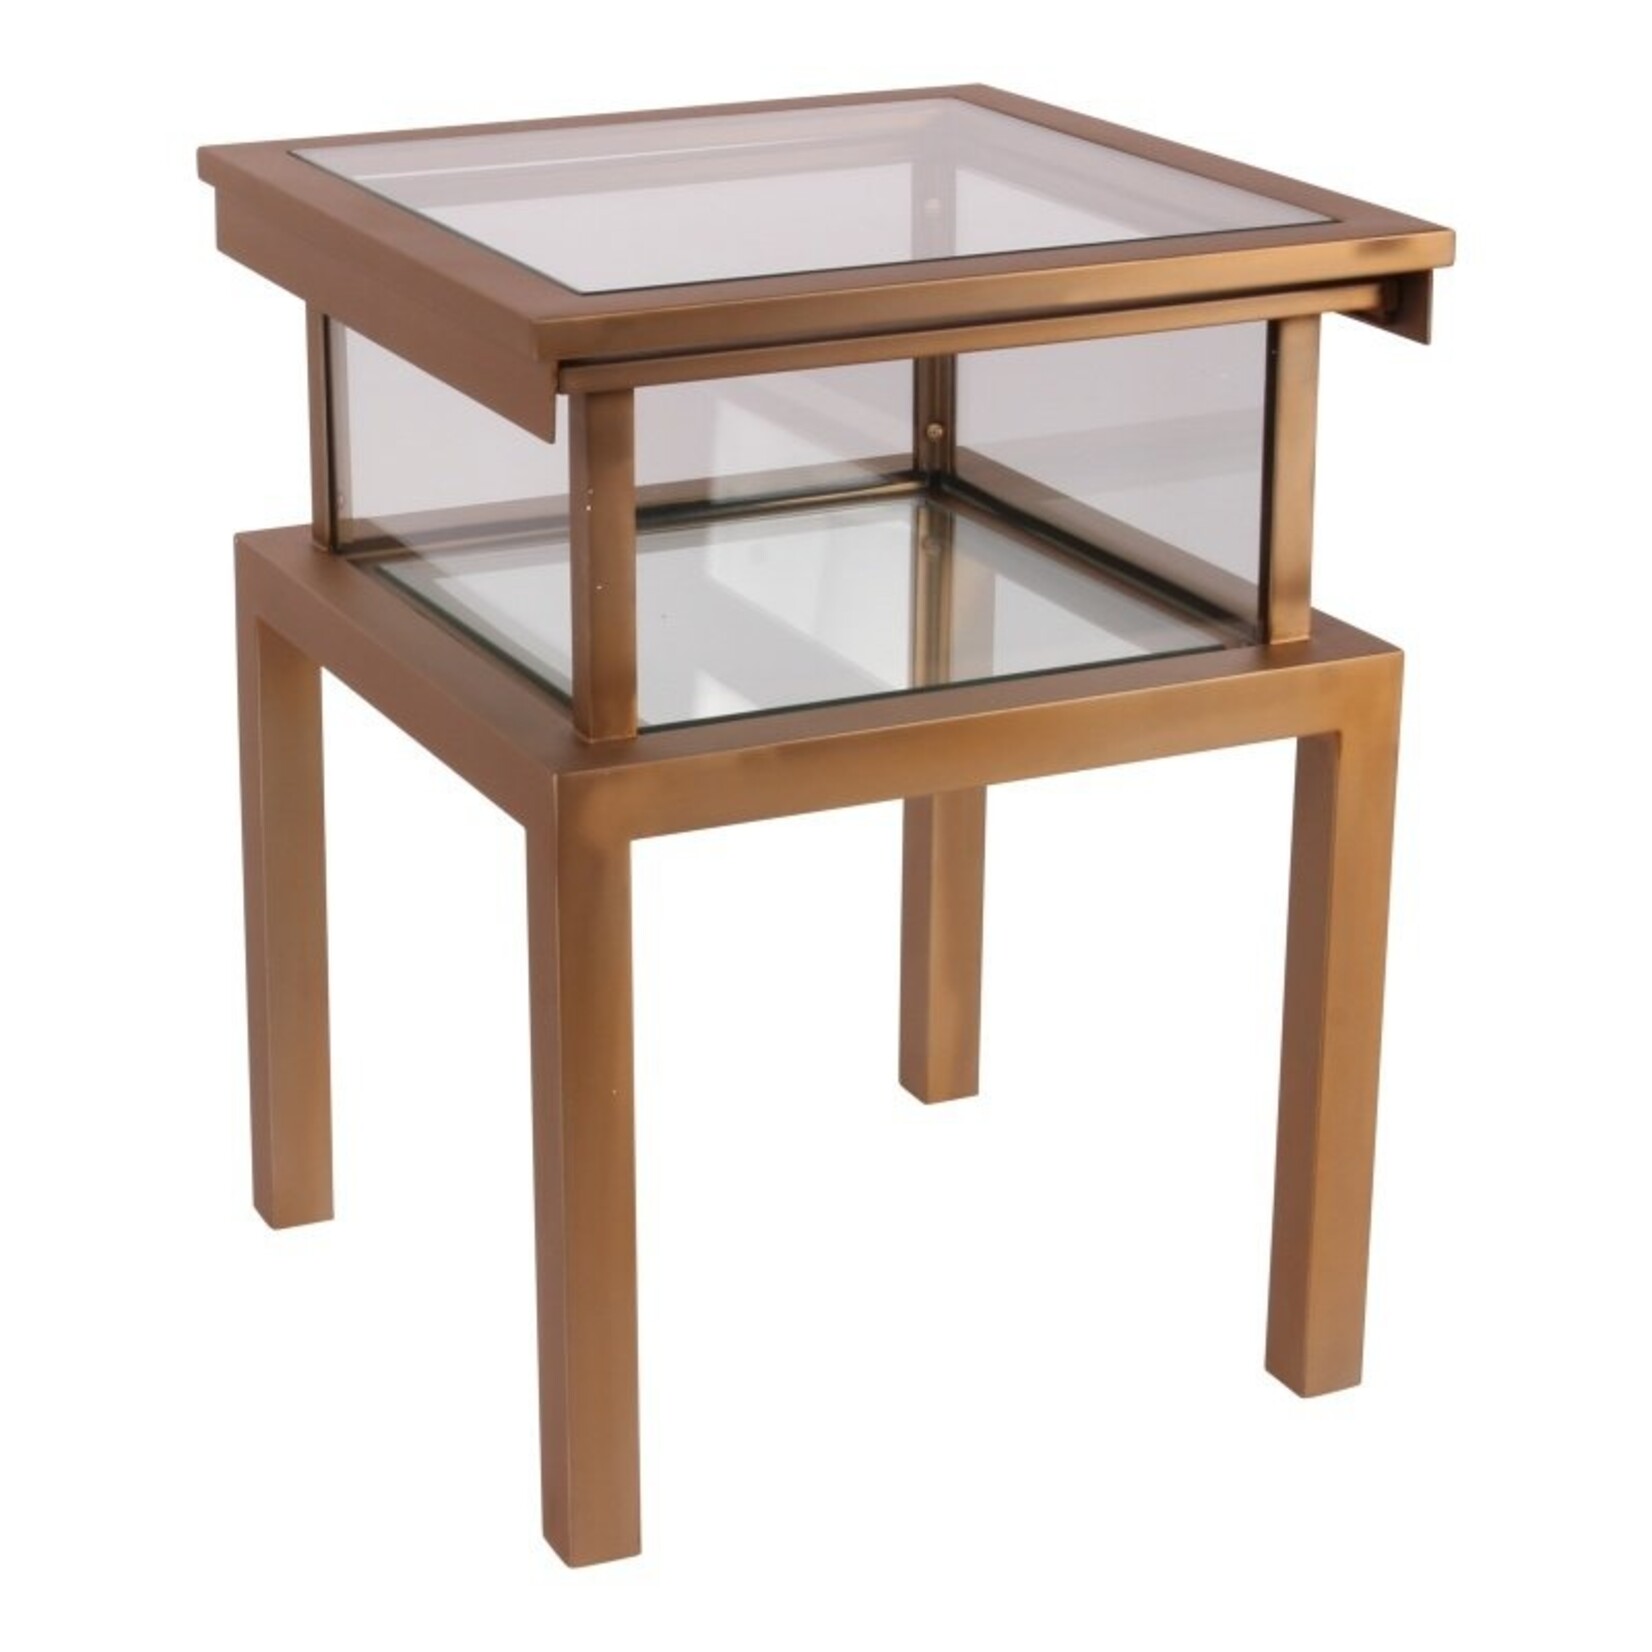 Dutch & Style Antigua square side table gold